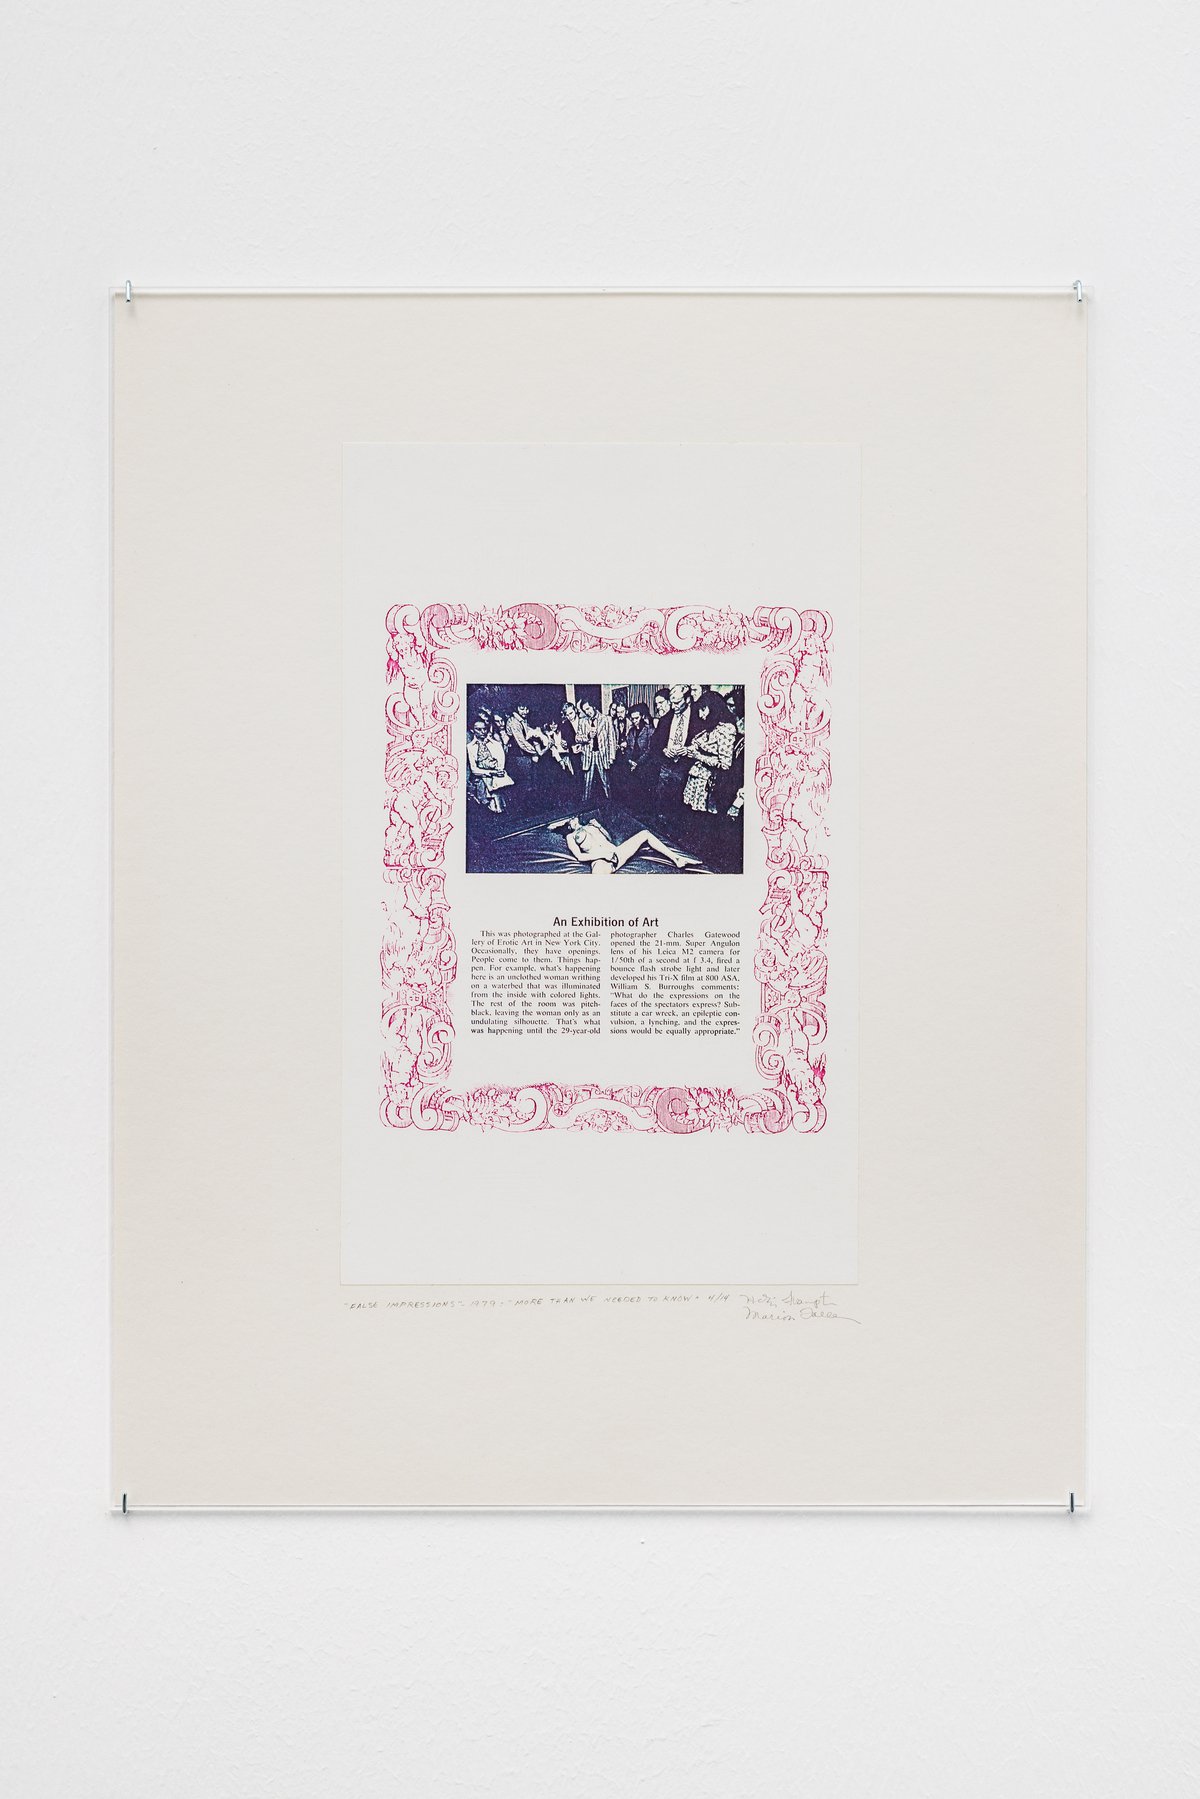 Hollis Frampton and Marion Faller&#x27;More than we needed to know&#x27; from False Impressions, 1979Colour xerograph on paper51 x 41 cm